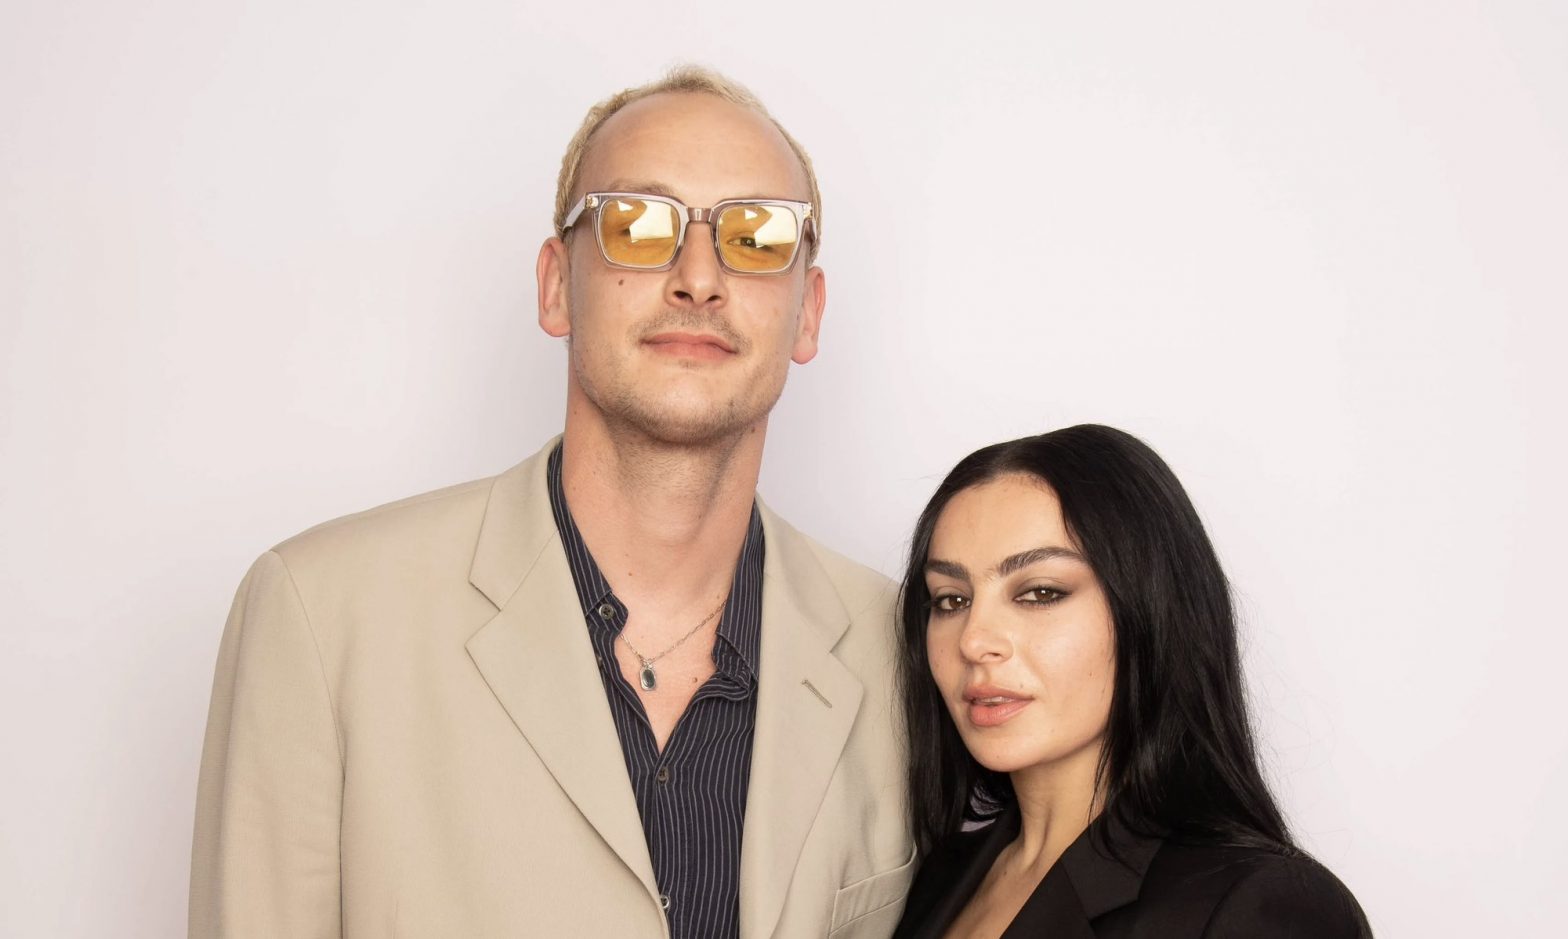 Charli XCX engaged to boyfriend George Daniel of The 1975: Report